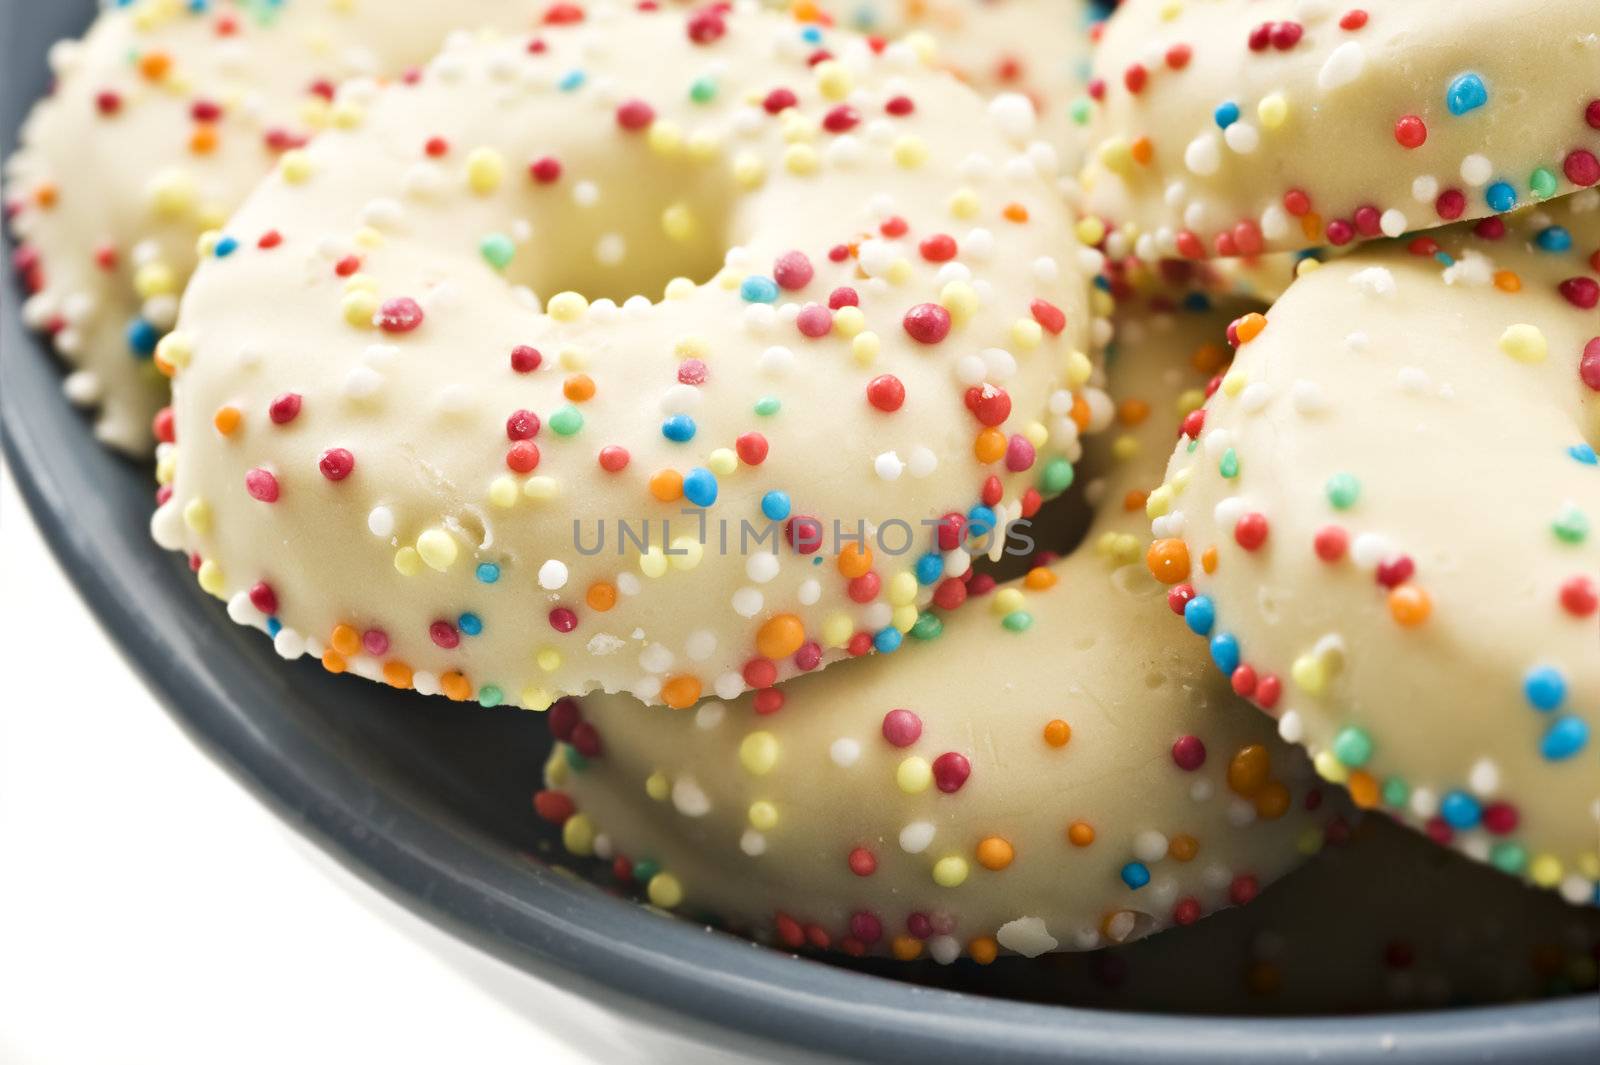 Decorated cookies in a bowl by tish1